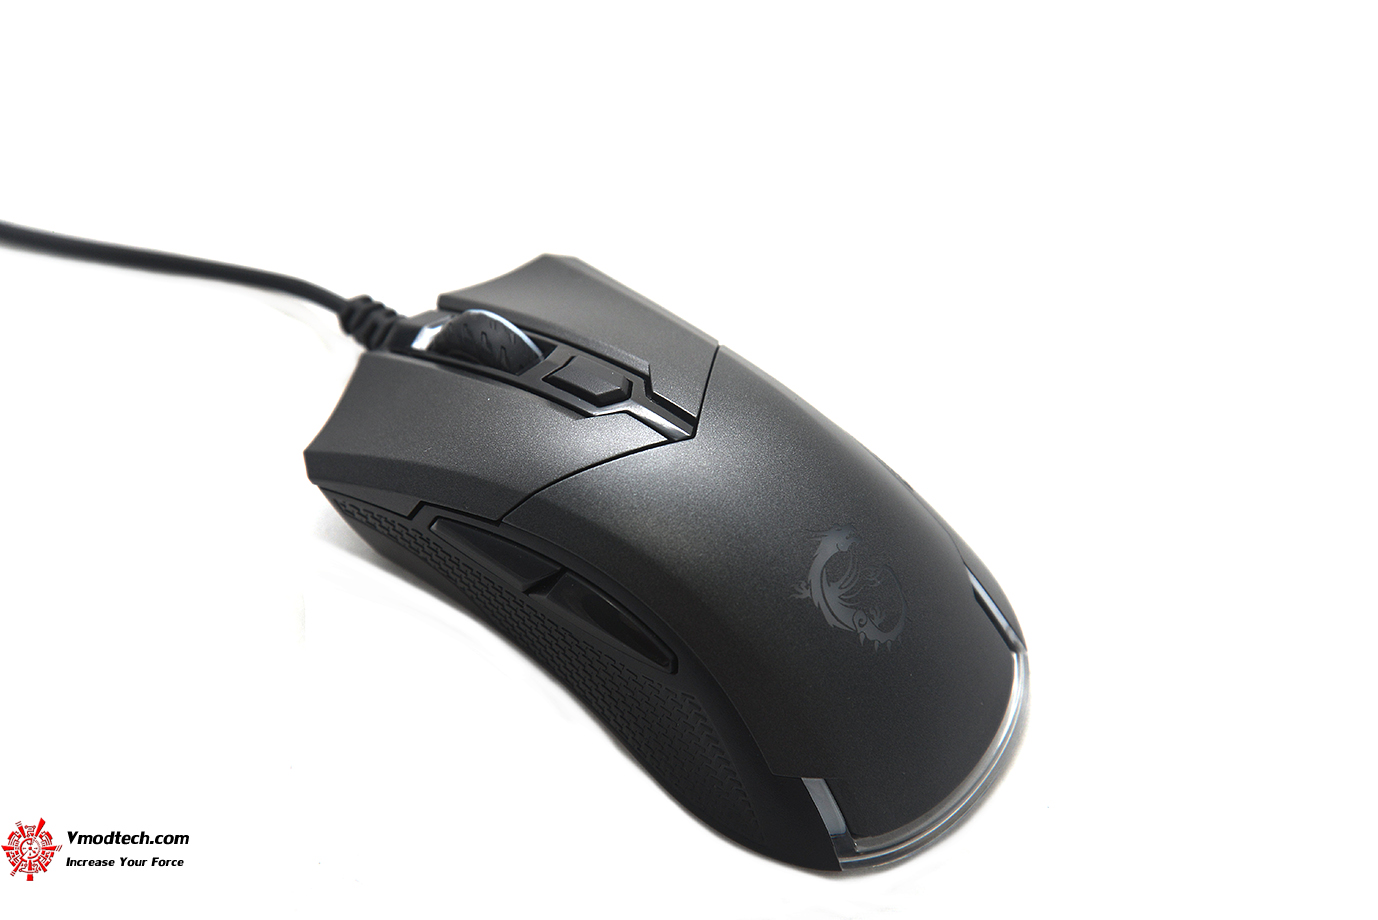 dsc 4940 MSI CLUTCH GM50 GAMING MOUSE REVIEW